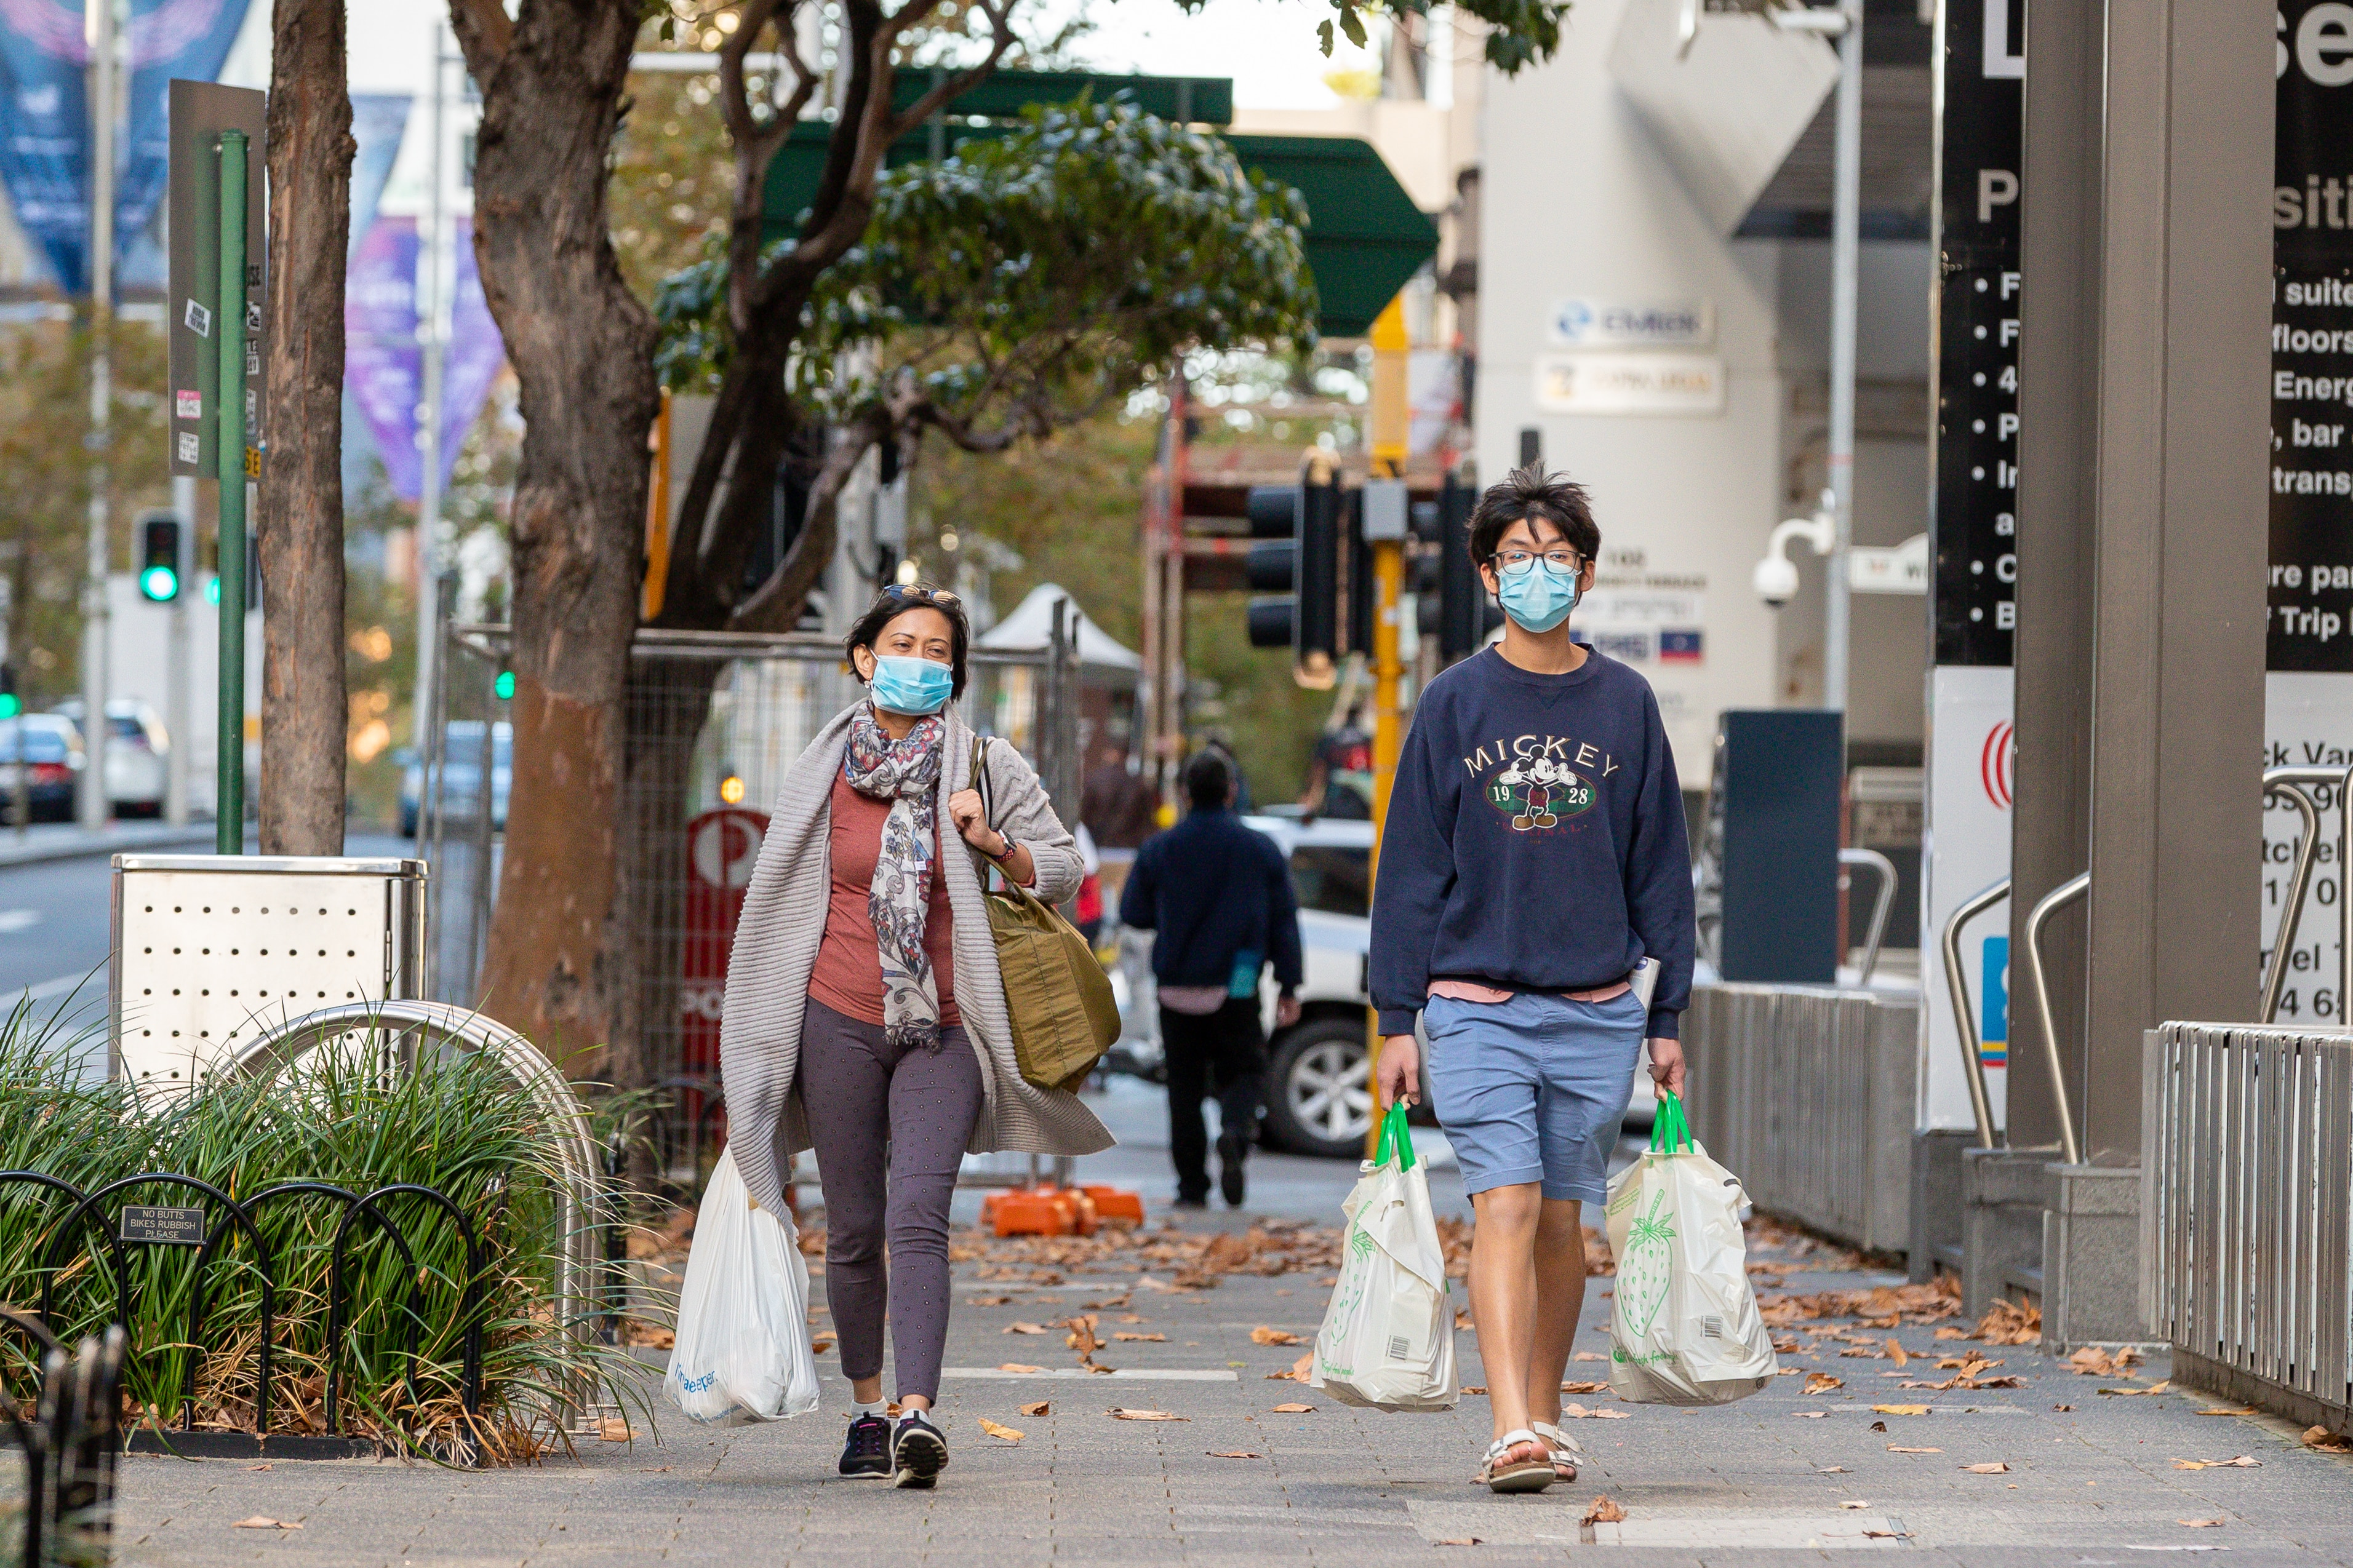 Masked members of the public are seen on St Georges Terrace in Perth.